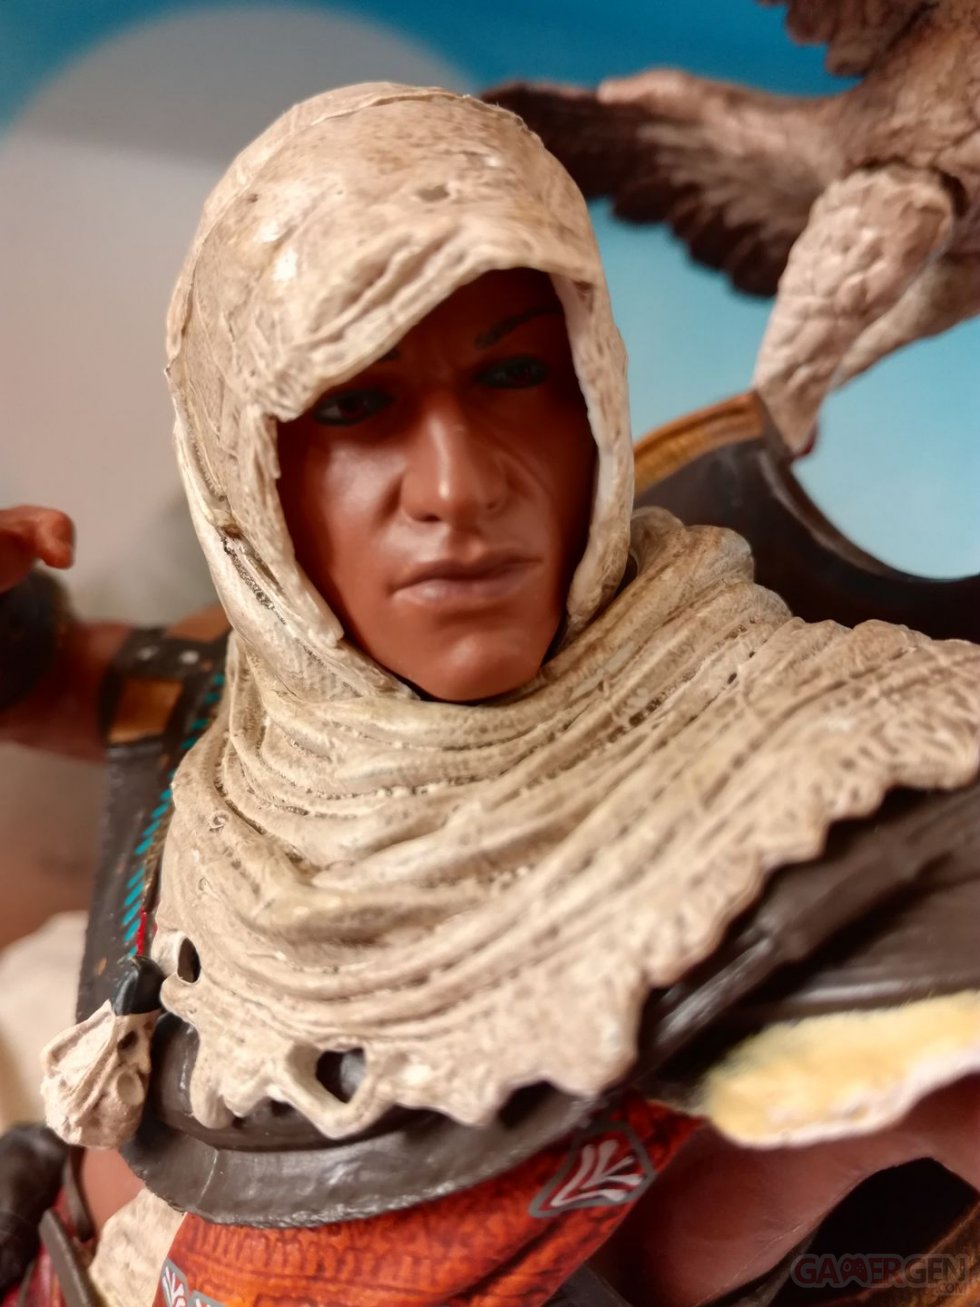 Assassin-Creed-Origins-collector-Dawn-of-the-Creed-unboxing-déballage-69-31-10-2017